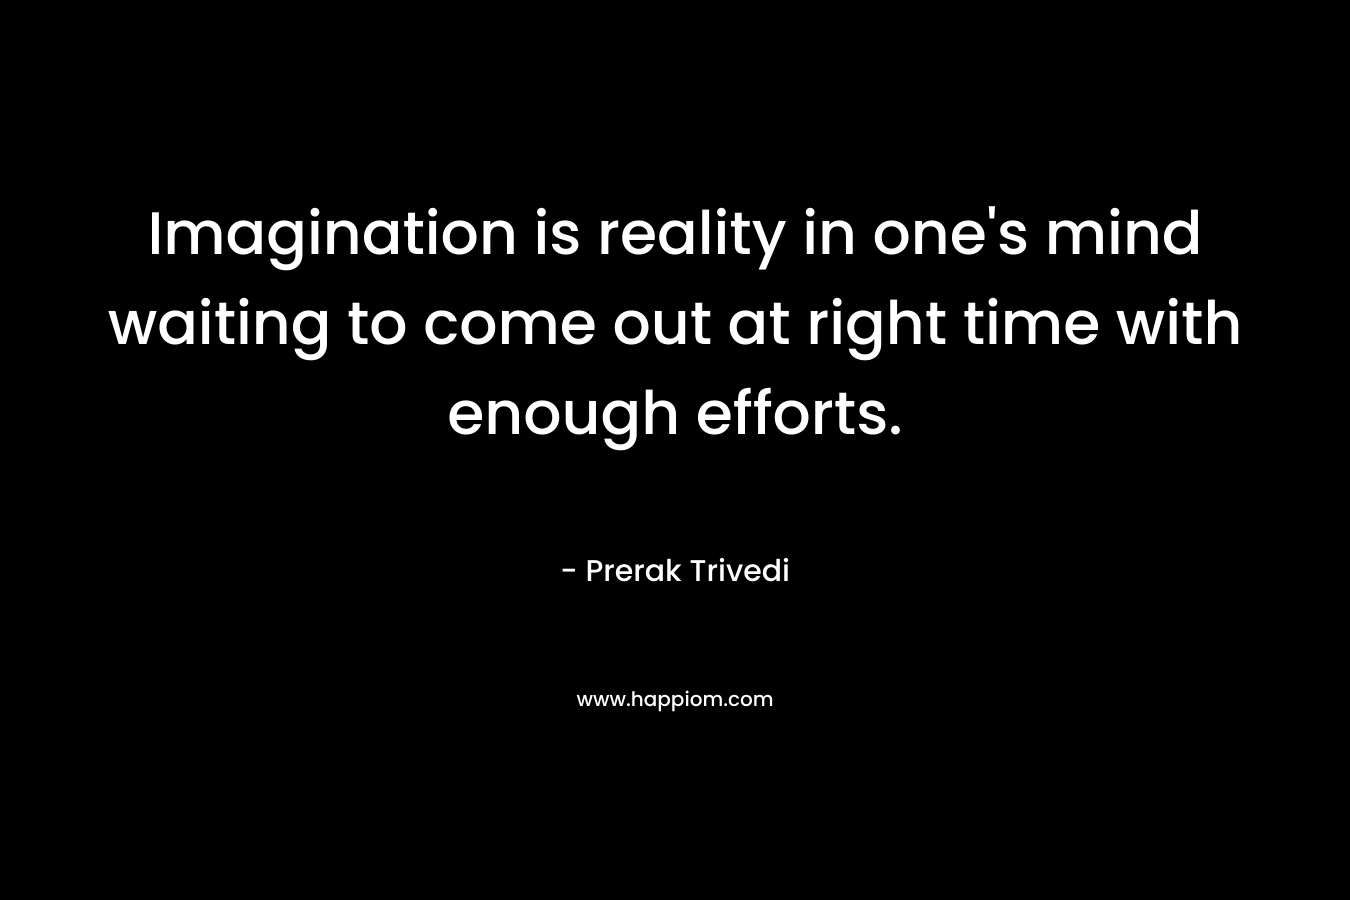 Imagination is reality in one's mind waiting to come out at right time with enough efforts.